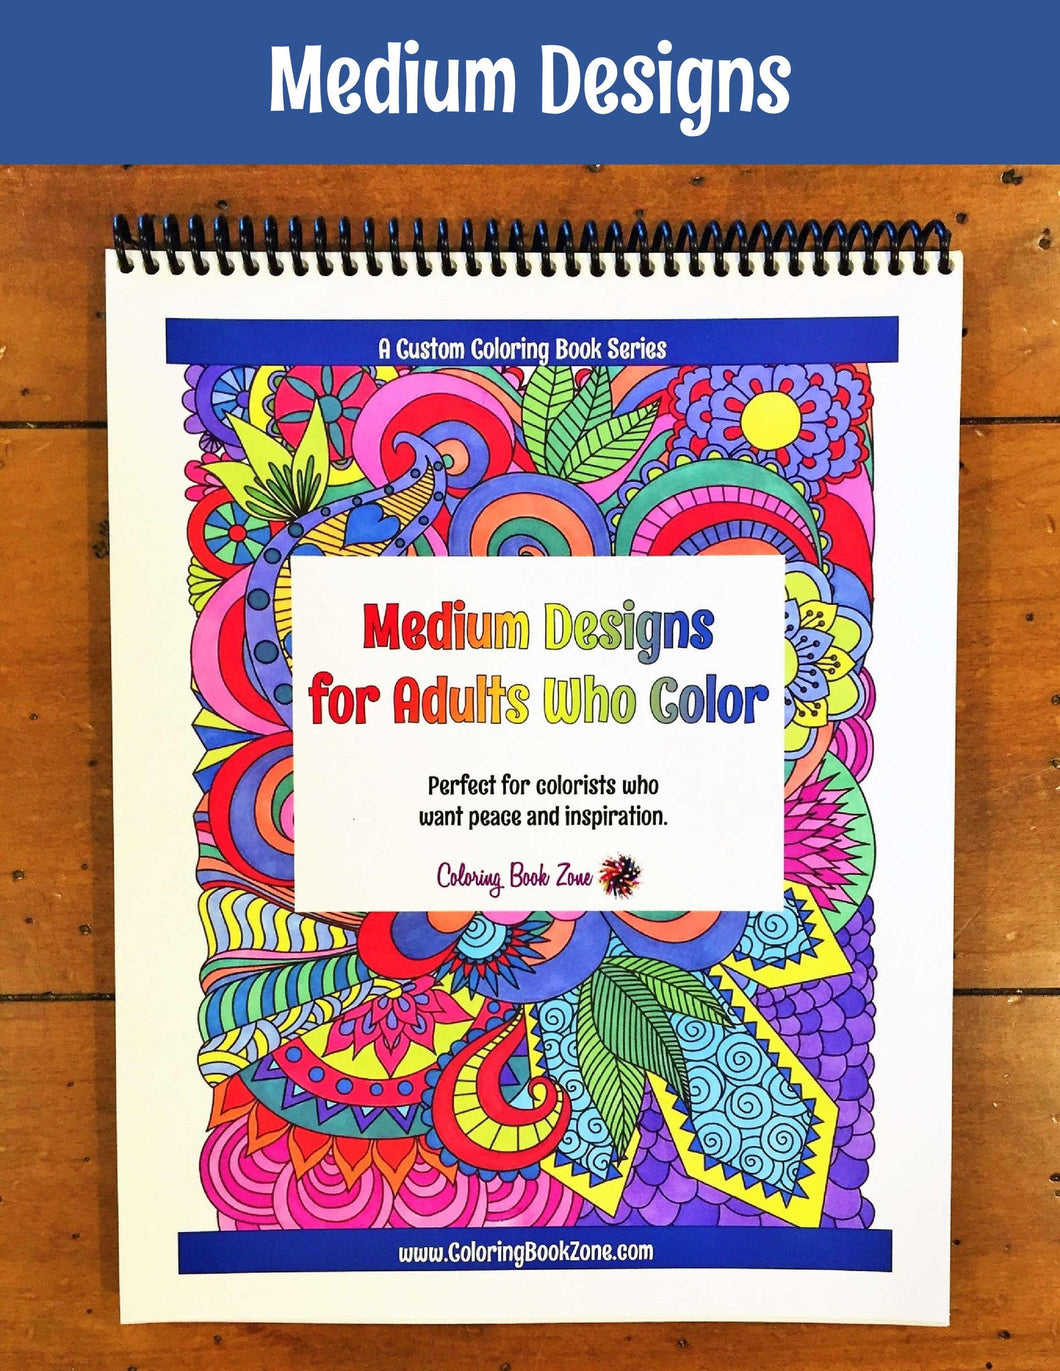 Adult Coloring Books - Top 13 Tips for New Colorists